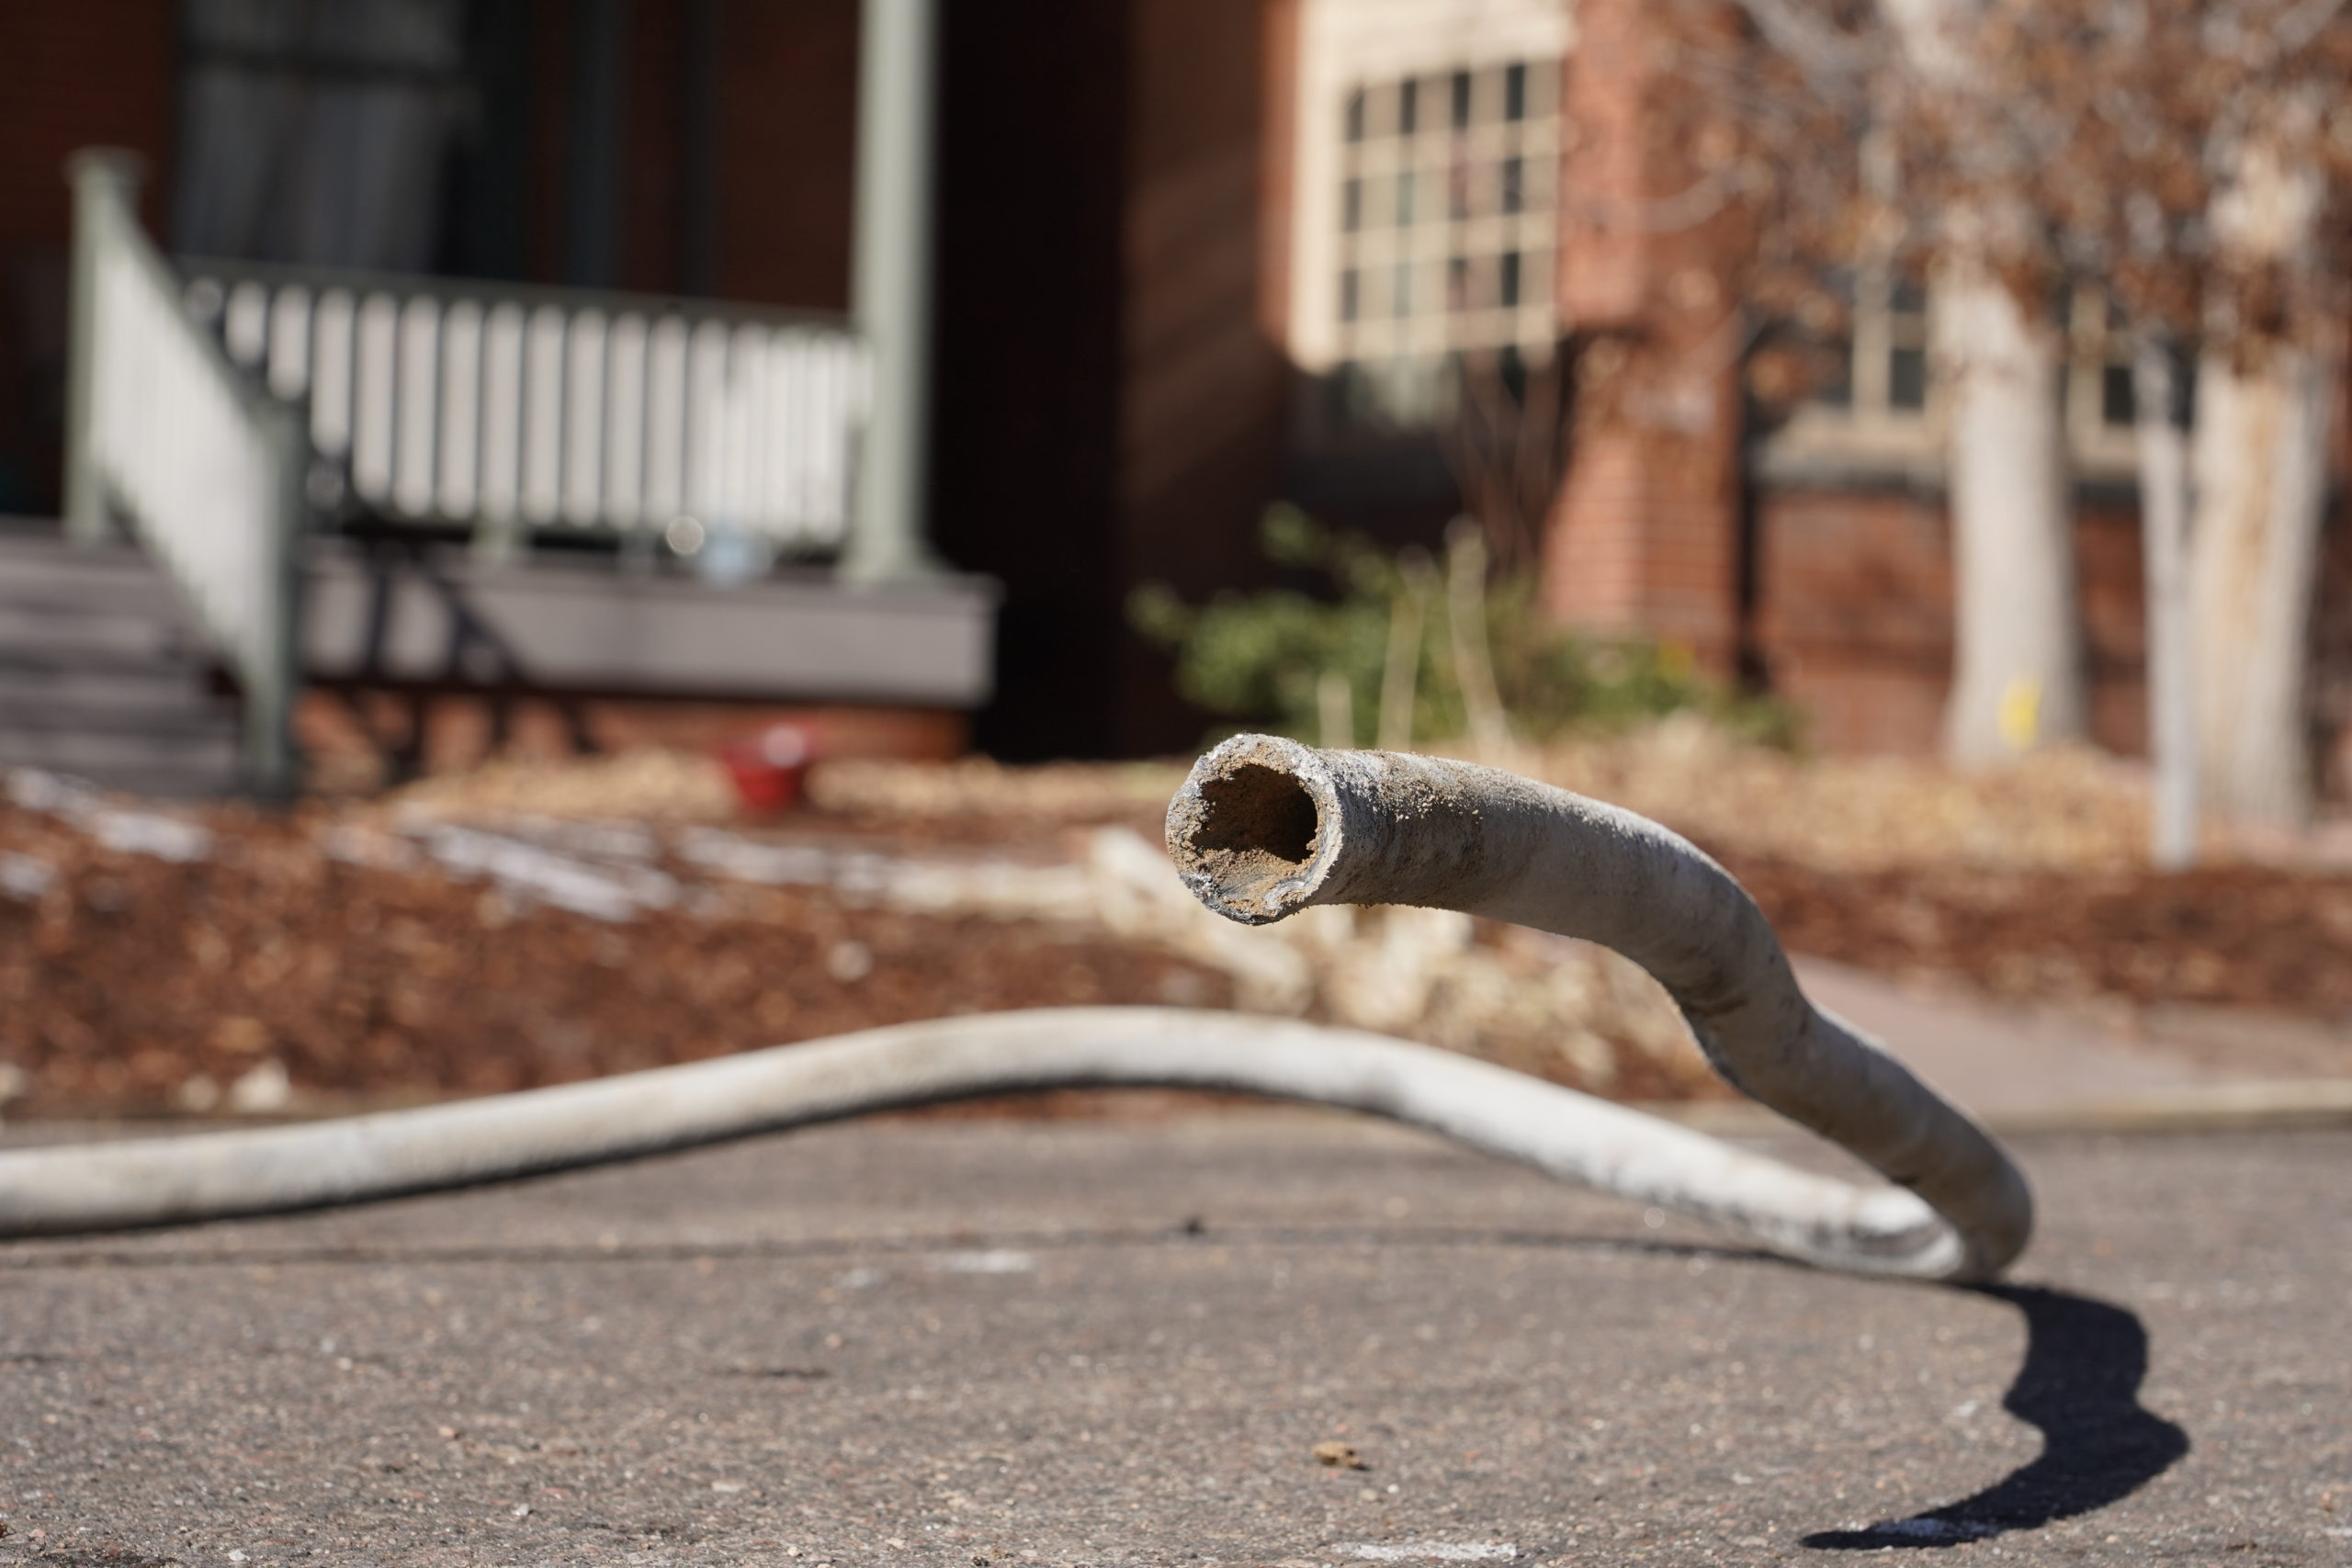 A pipe laying in the street in front of a home.